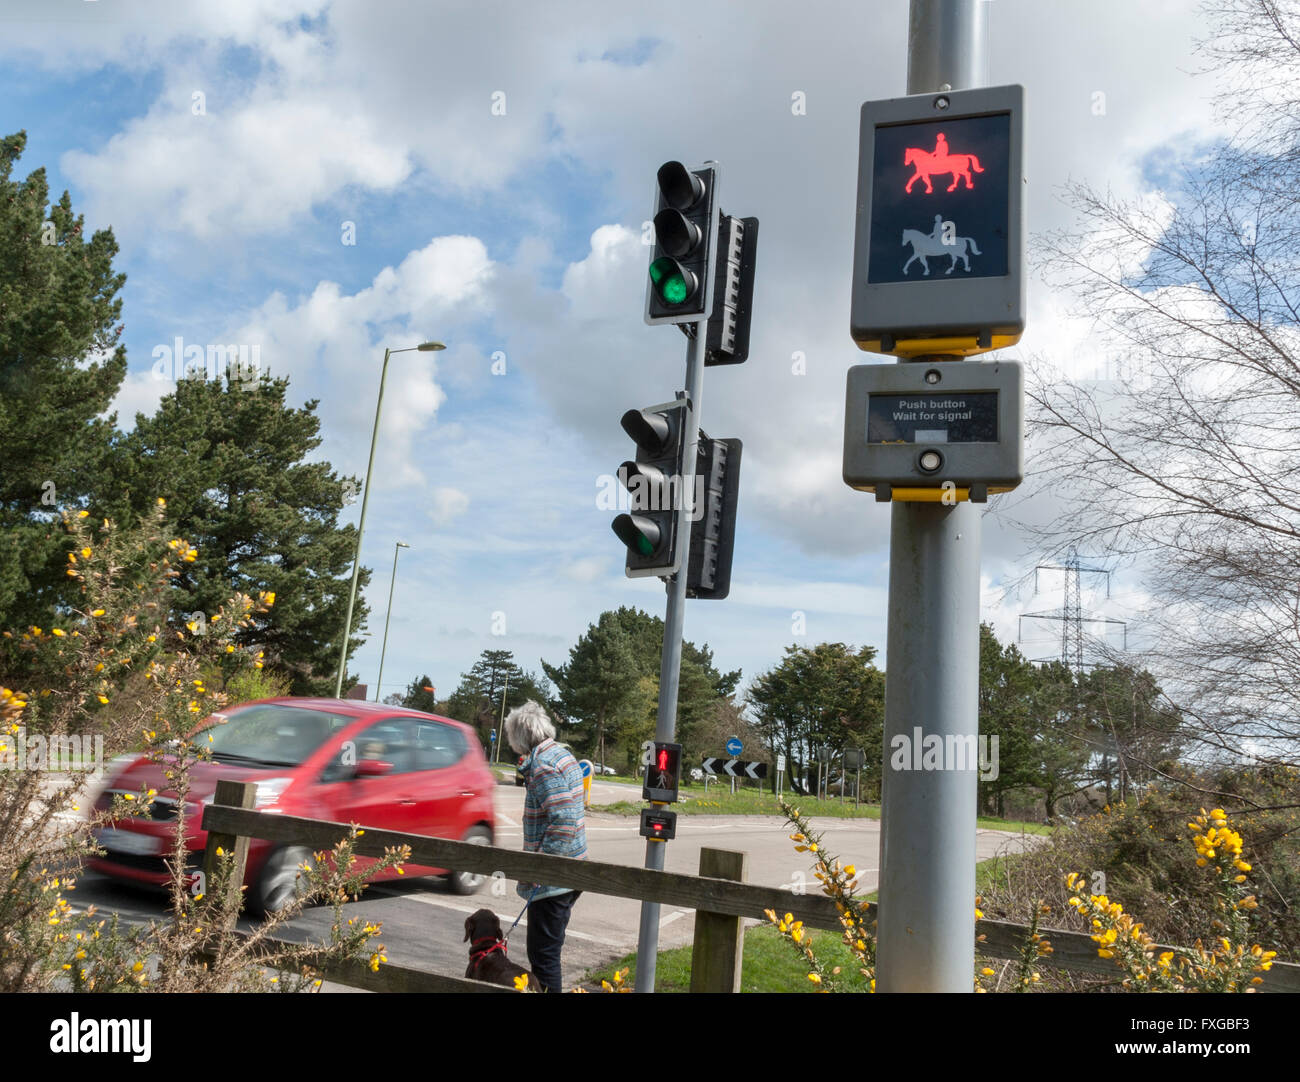 Pelican crossing showing horse and rider signal Stock Photo